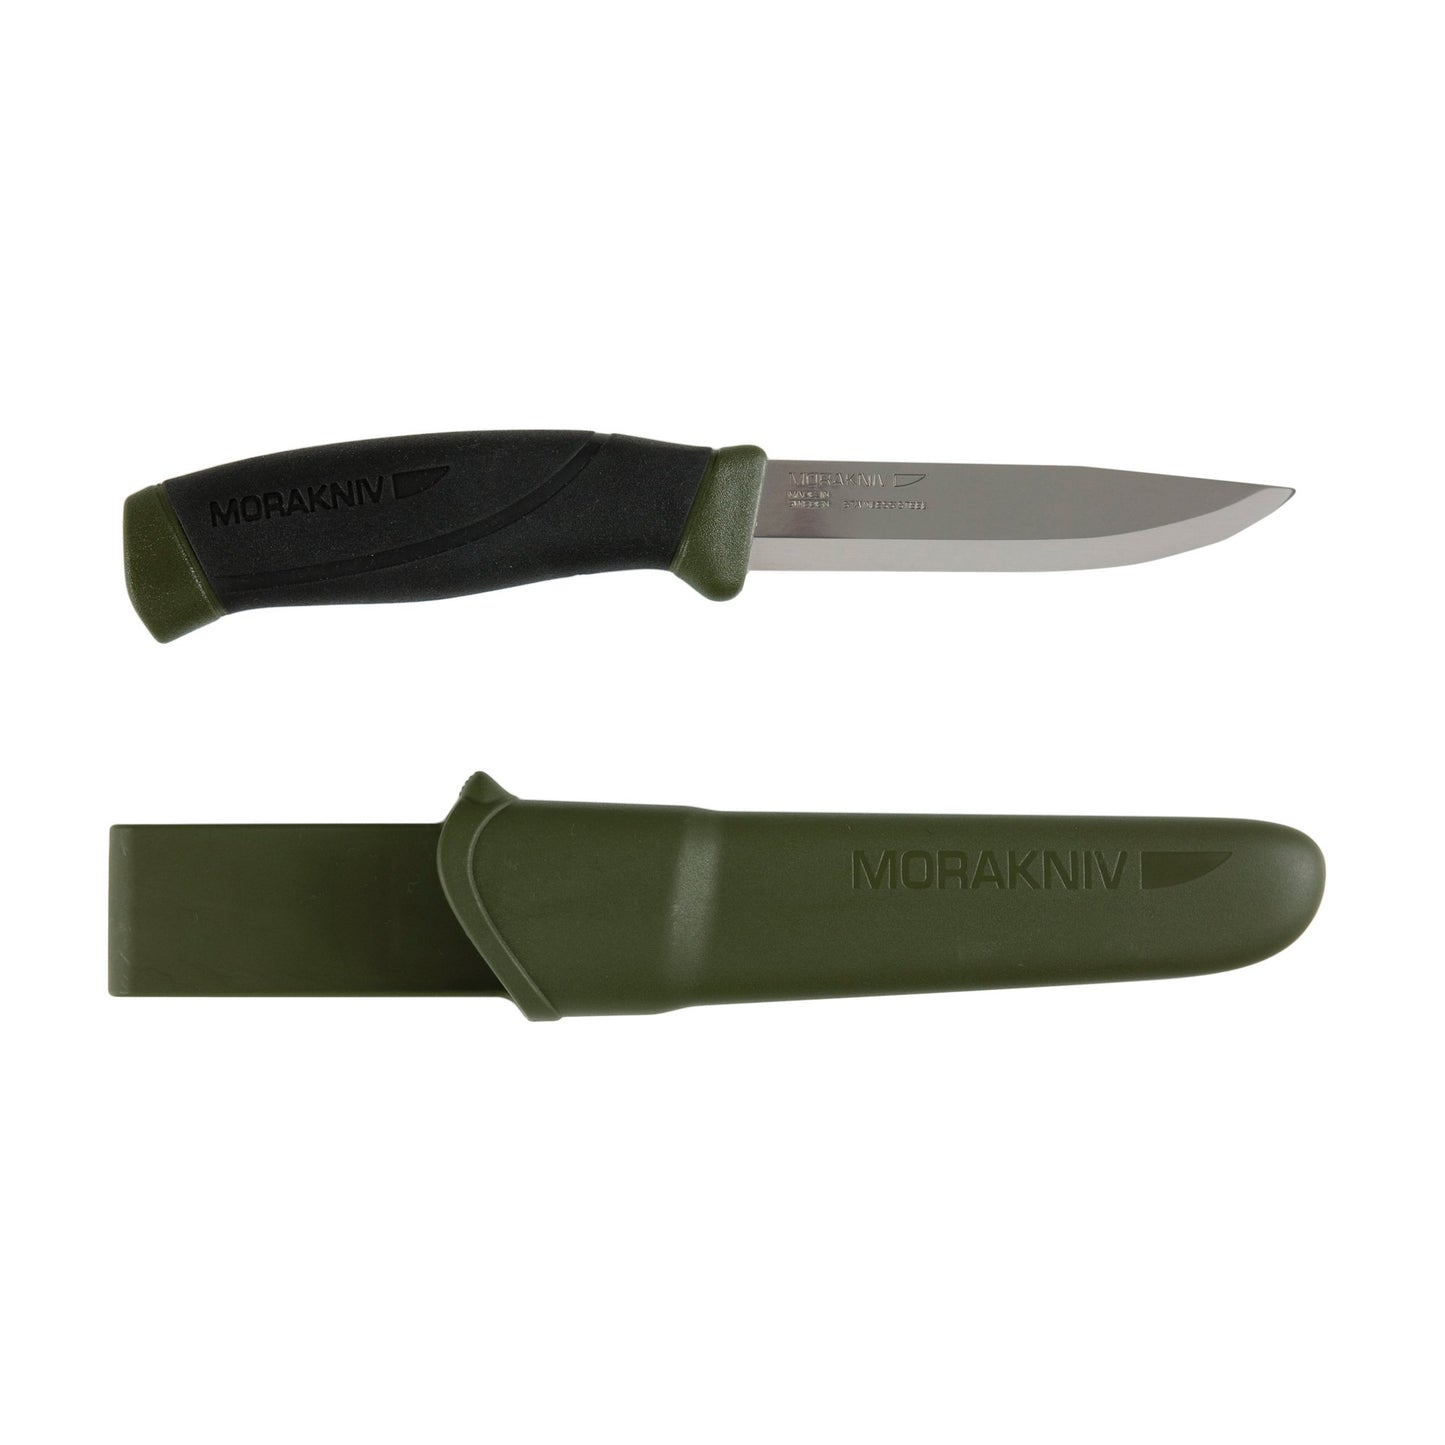 MORAKNIV Companion Fixed Blade Knife, Stainless Steel Blade, Green and Black